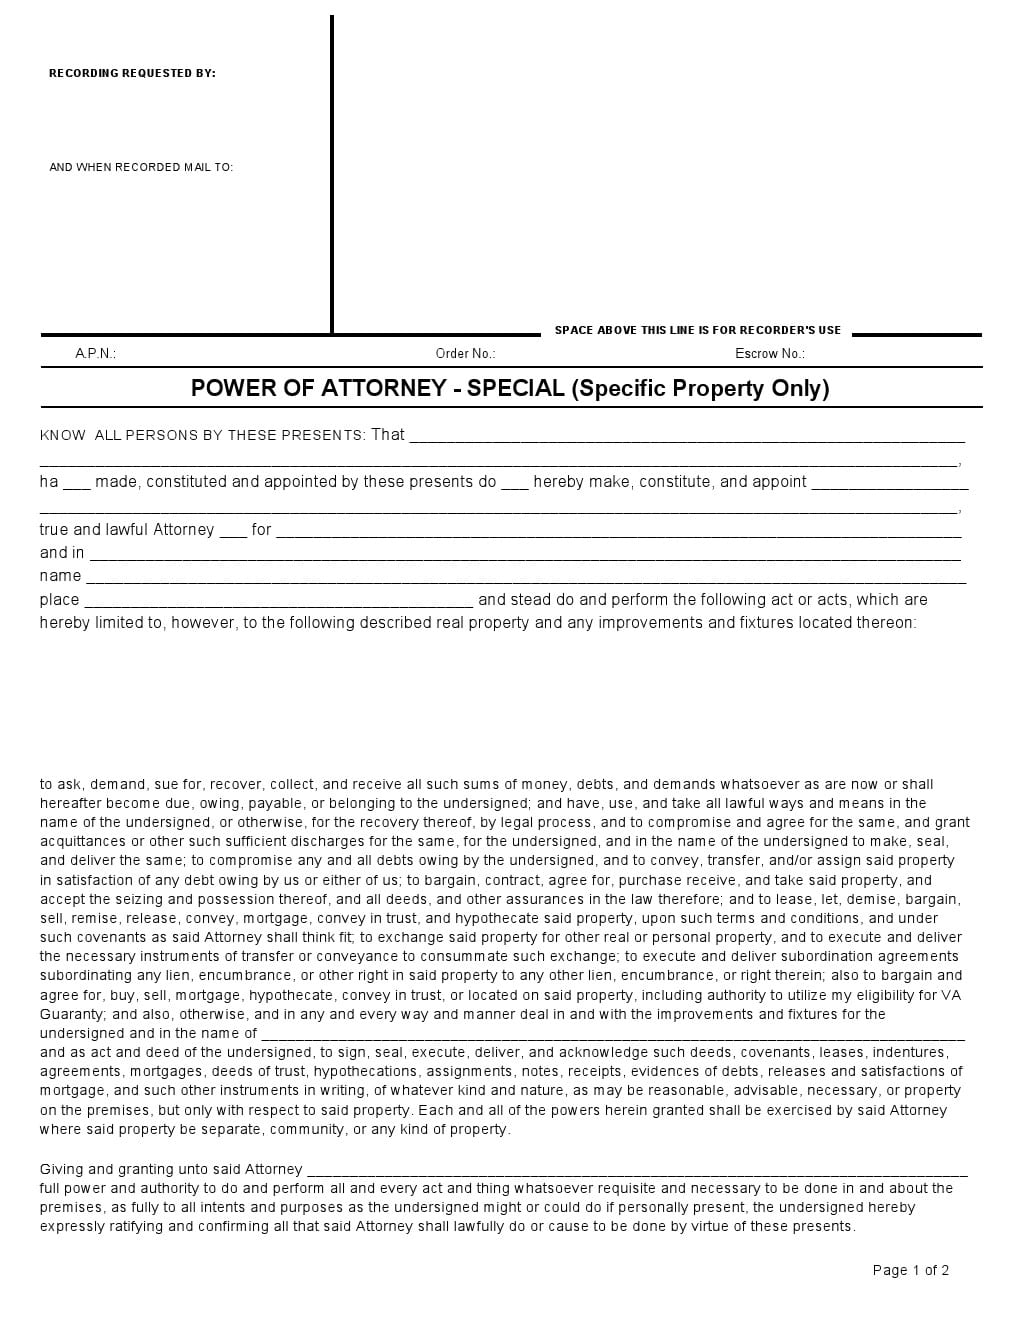 Free California Power Of Attorney Forms